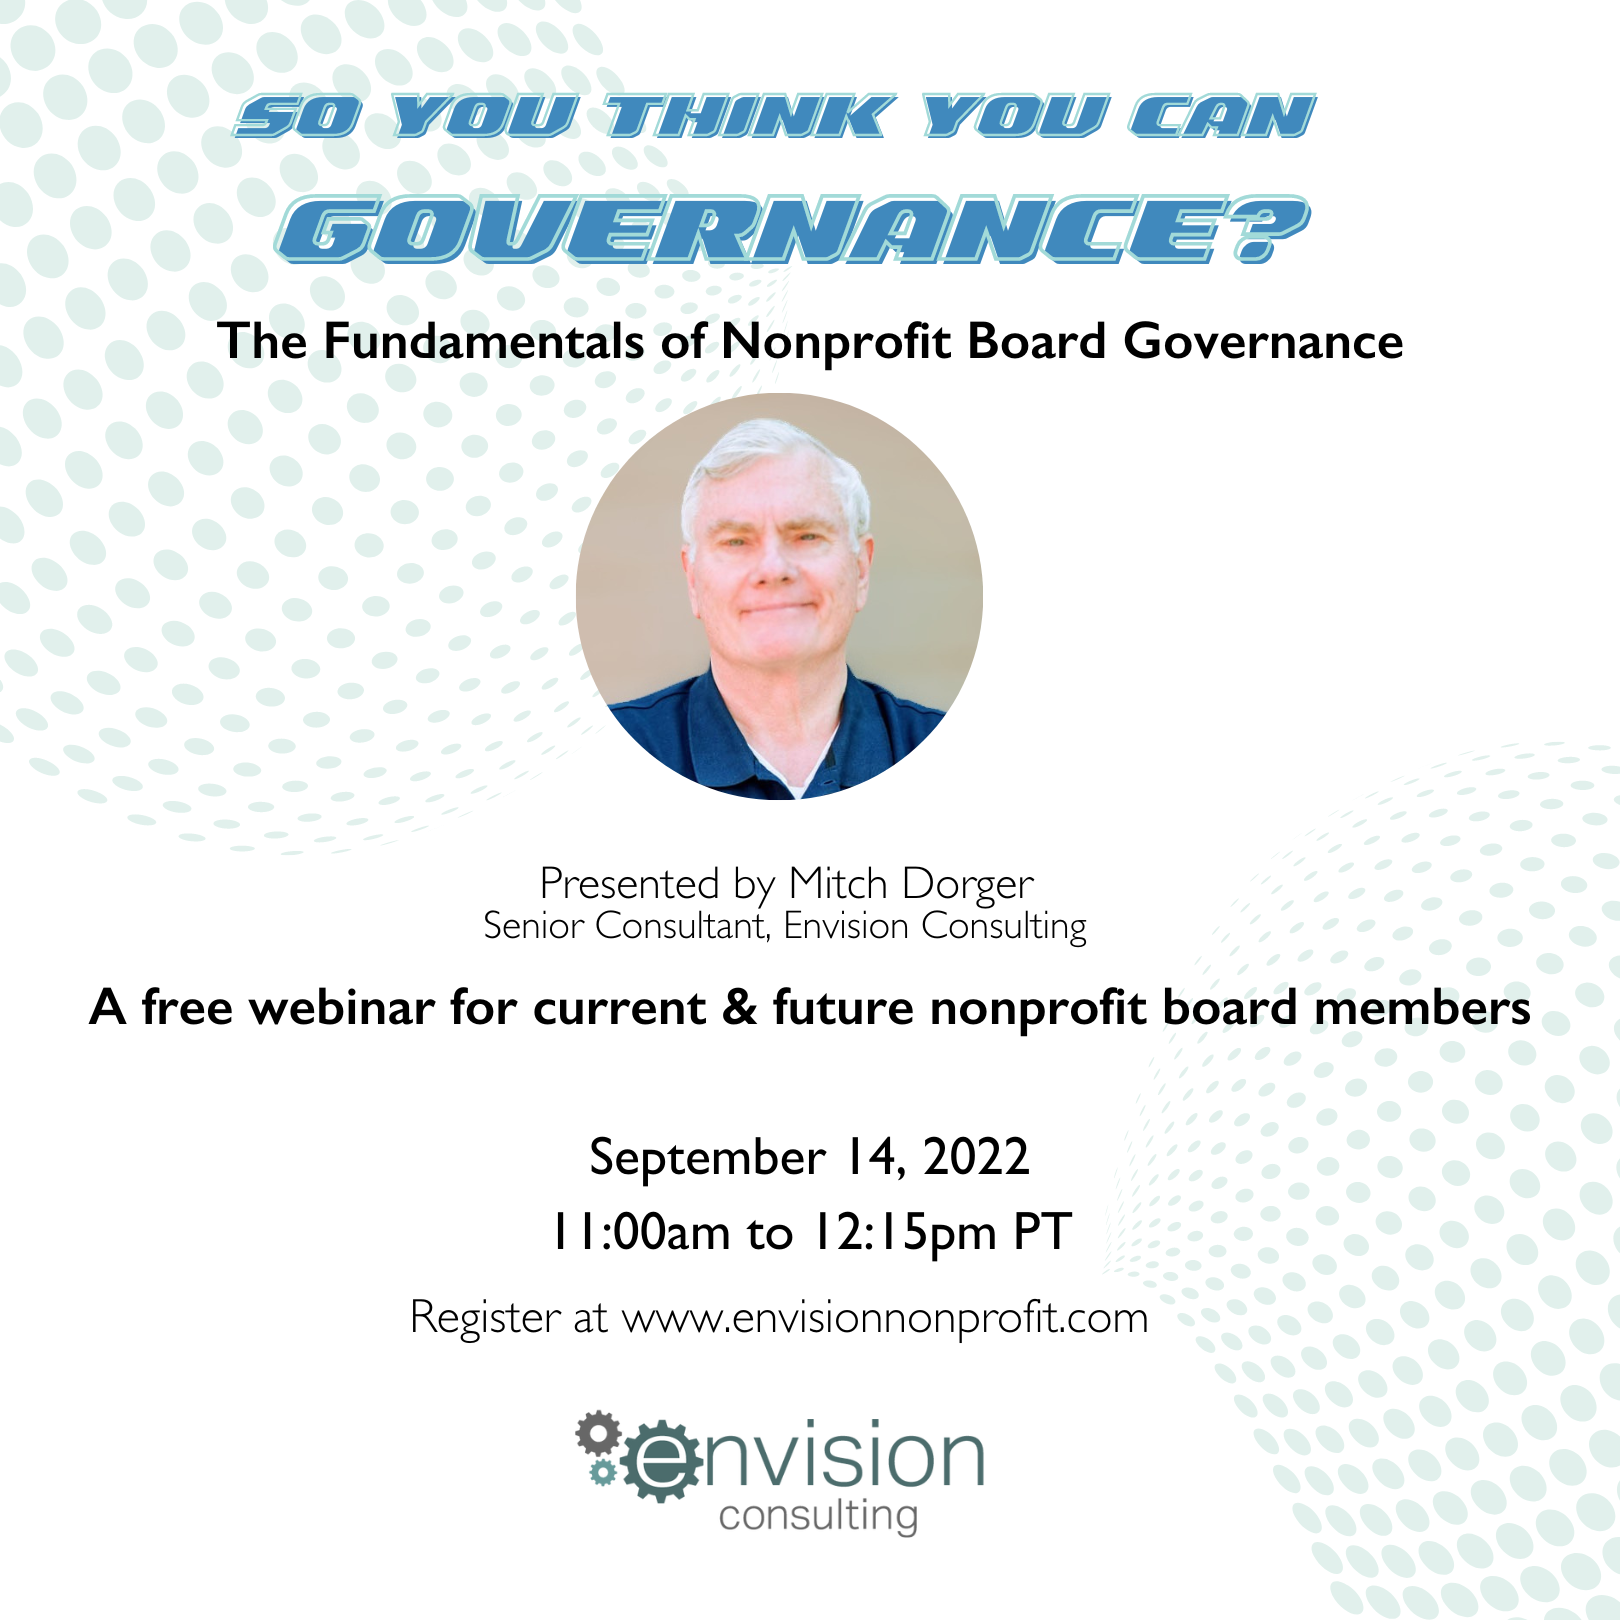 So You Think You Can Governance: The Fundamentals of Nonprofit Board Governance